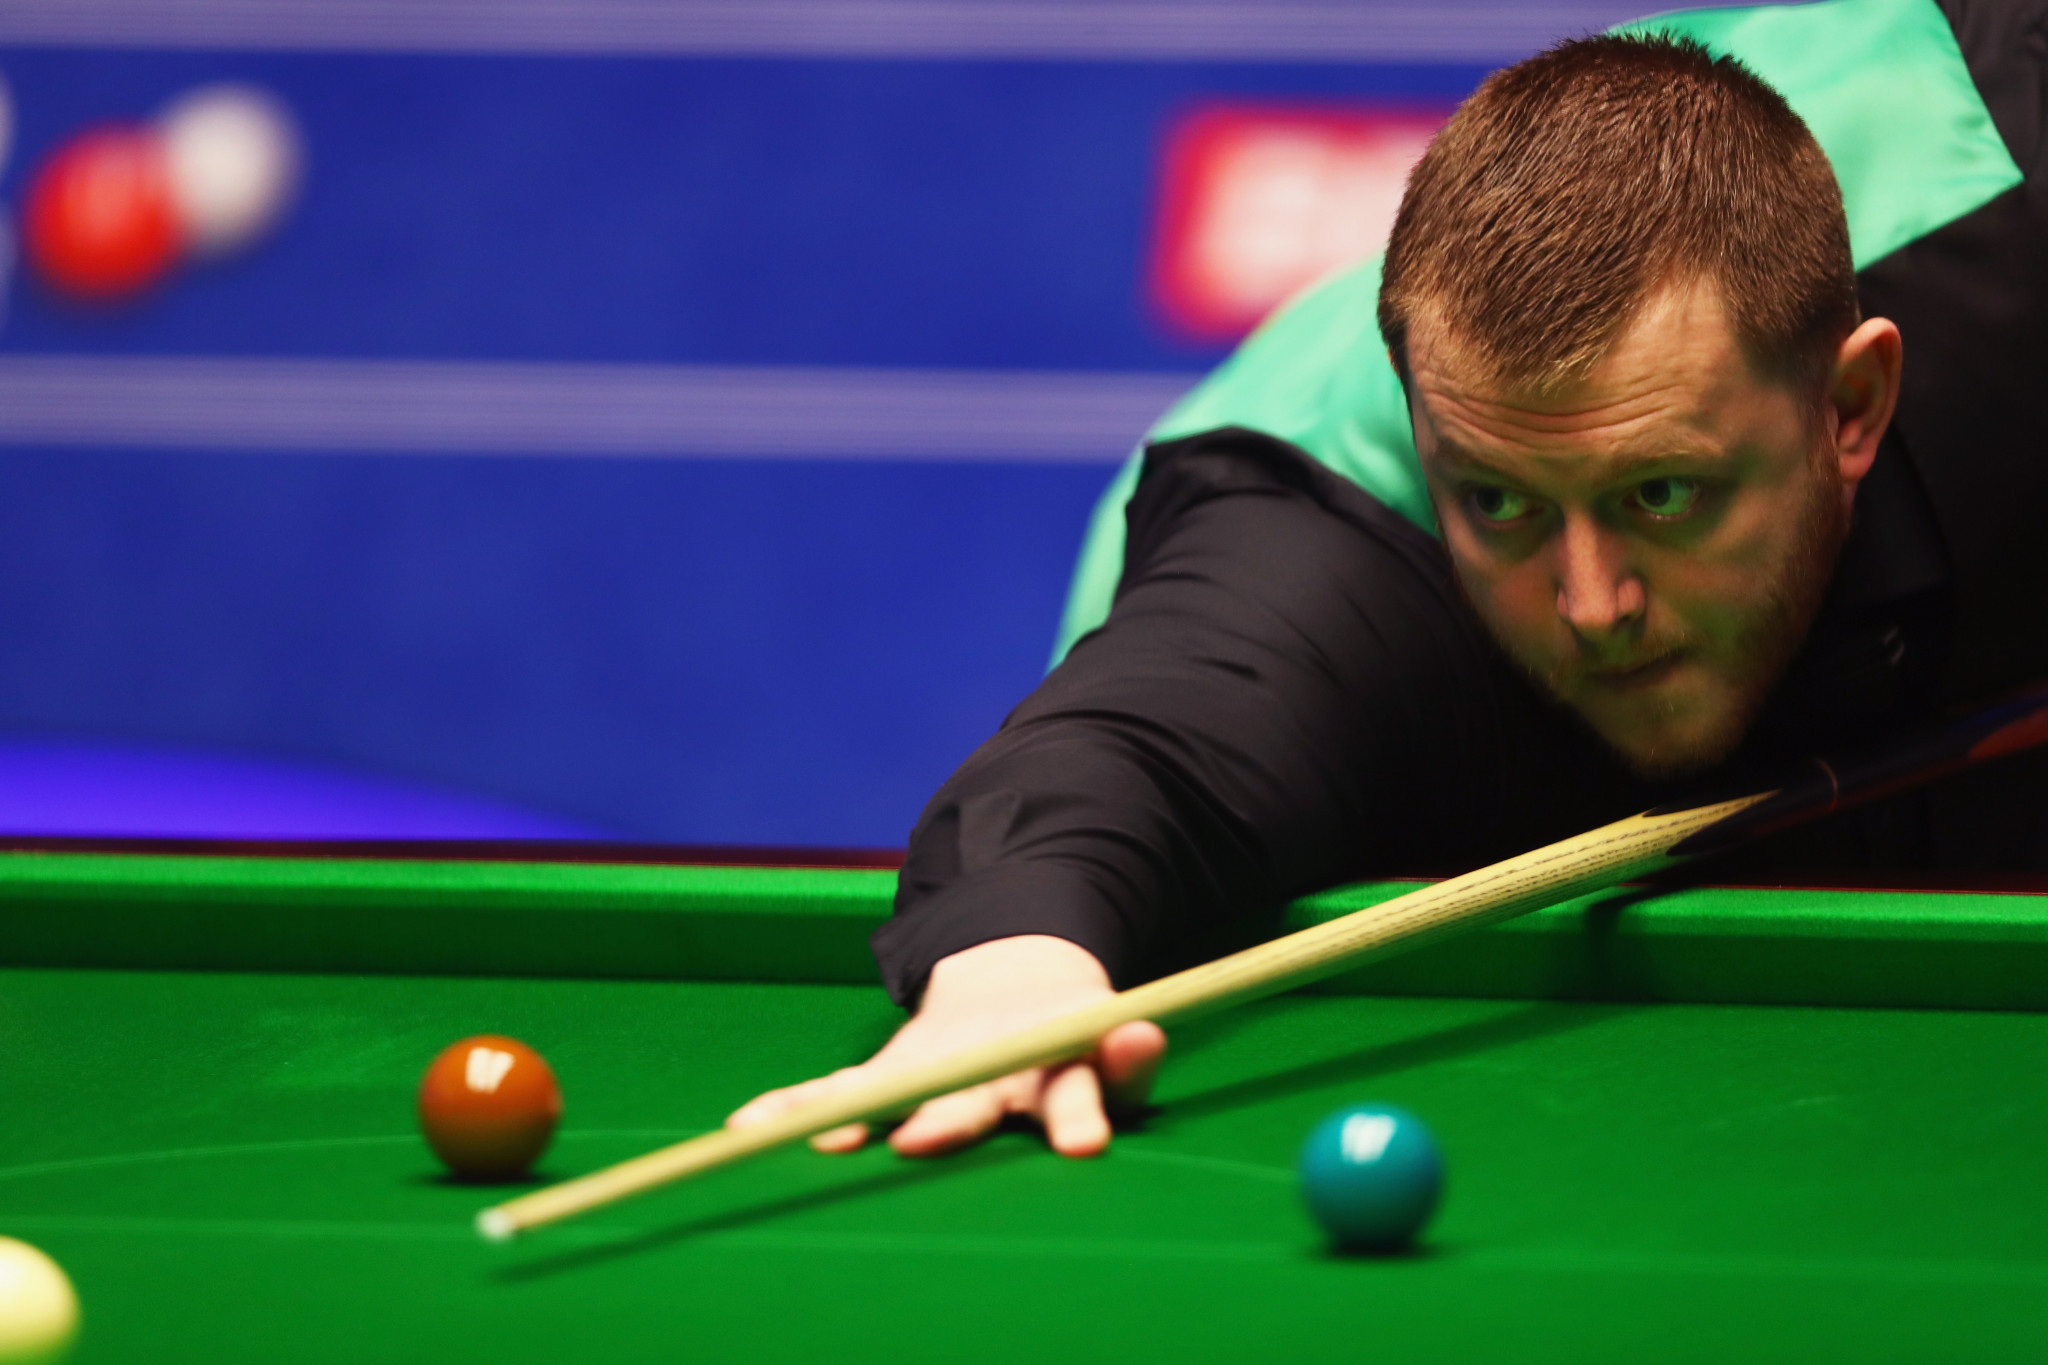 Allen and Murphy lose as seeds crash out on day five of World Snooker Championship